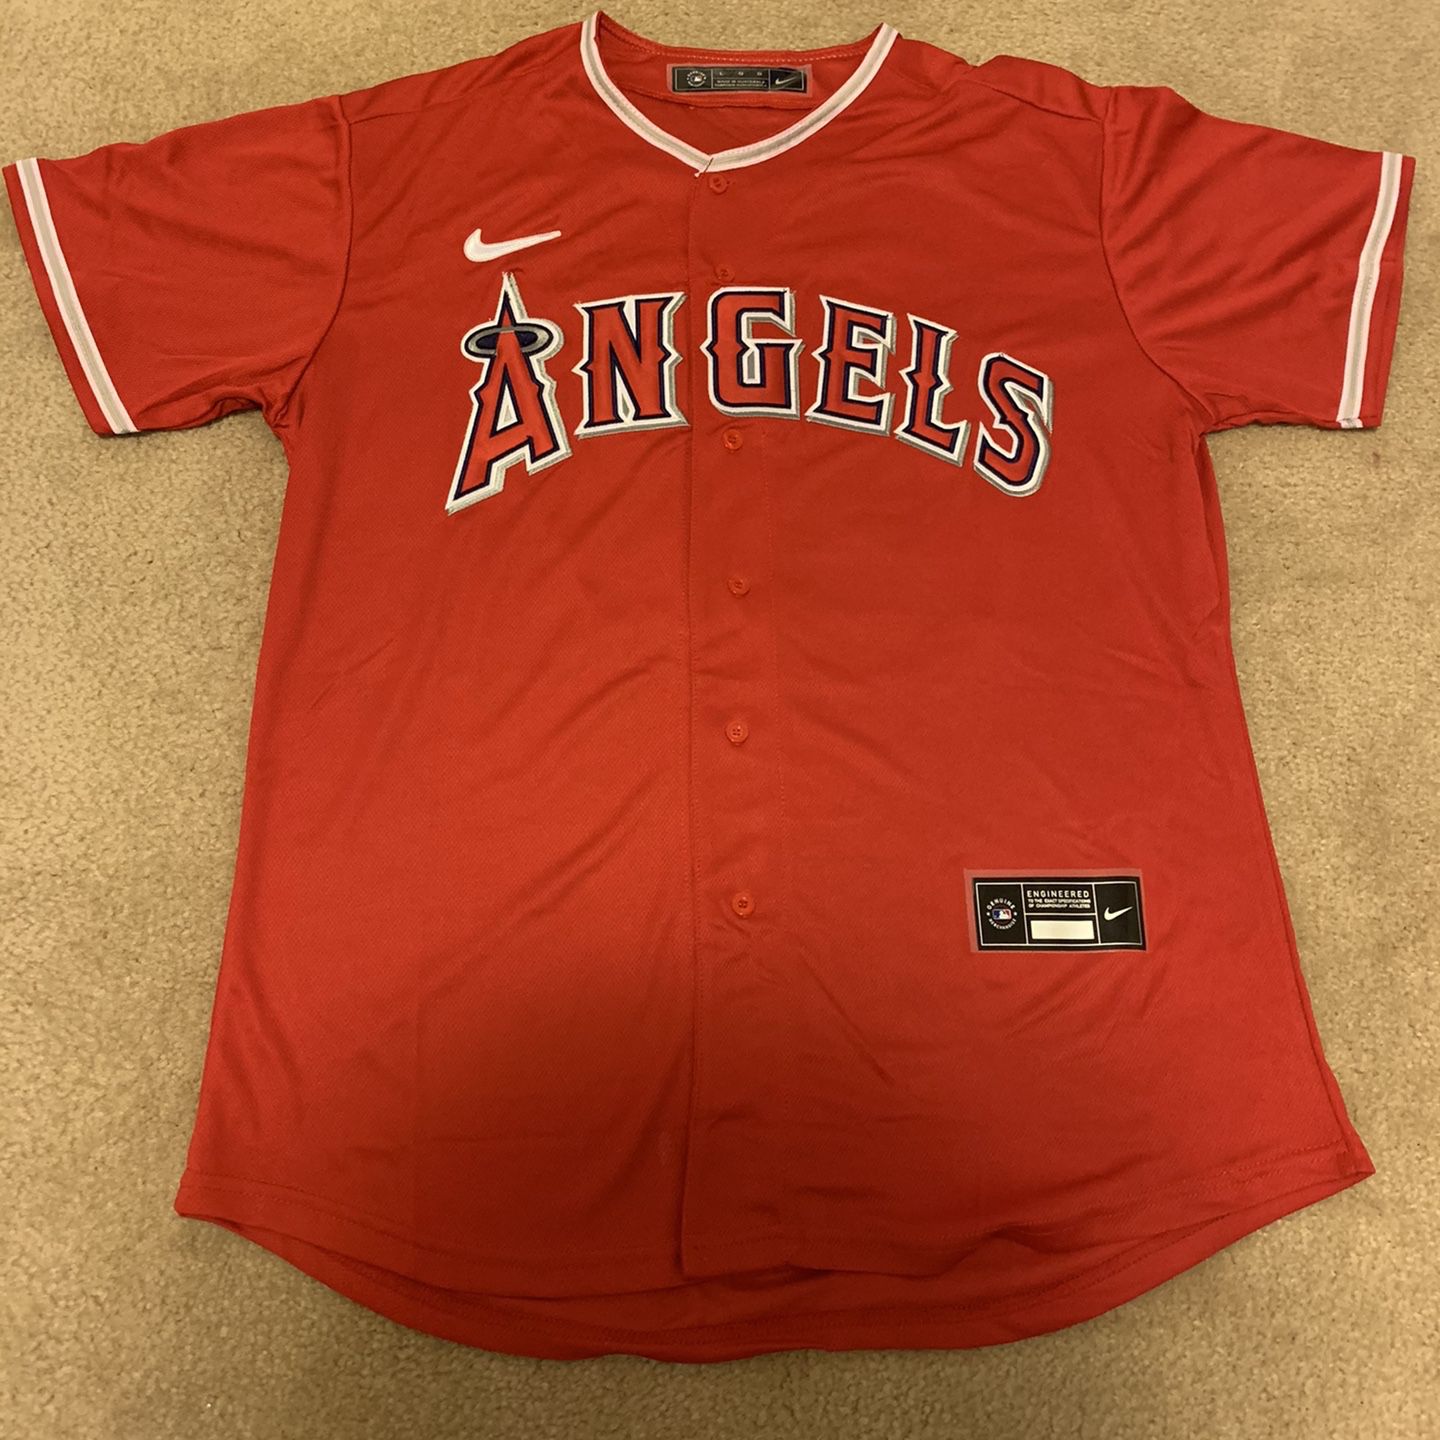 Mike Trout Jersey